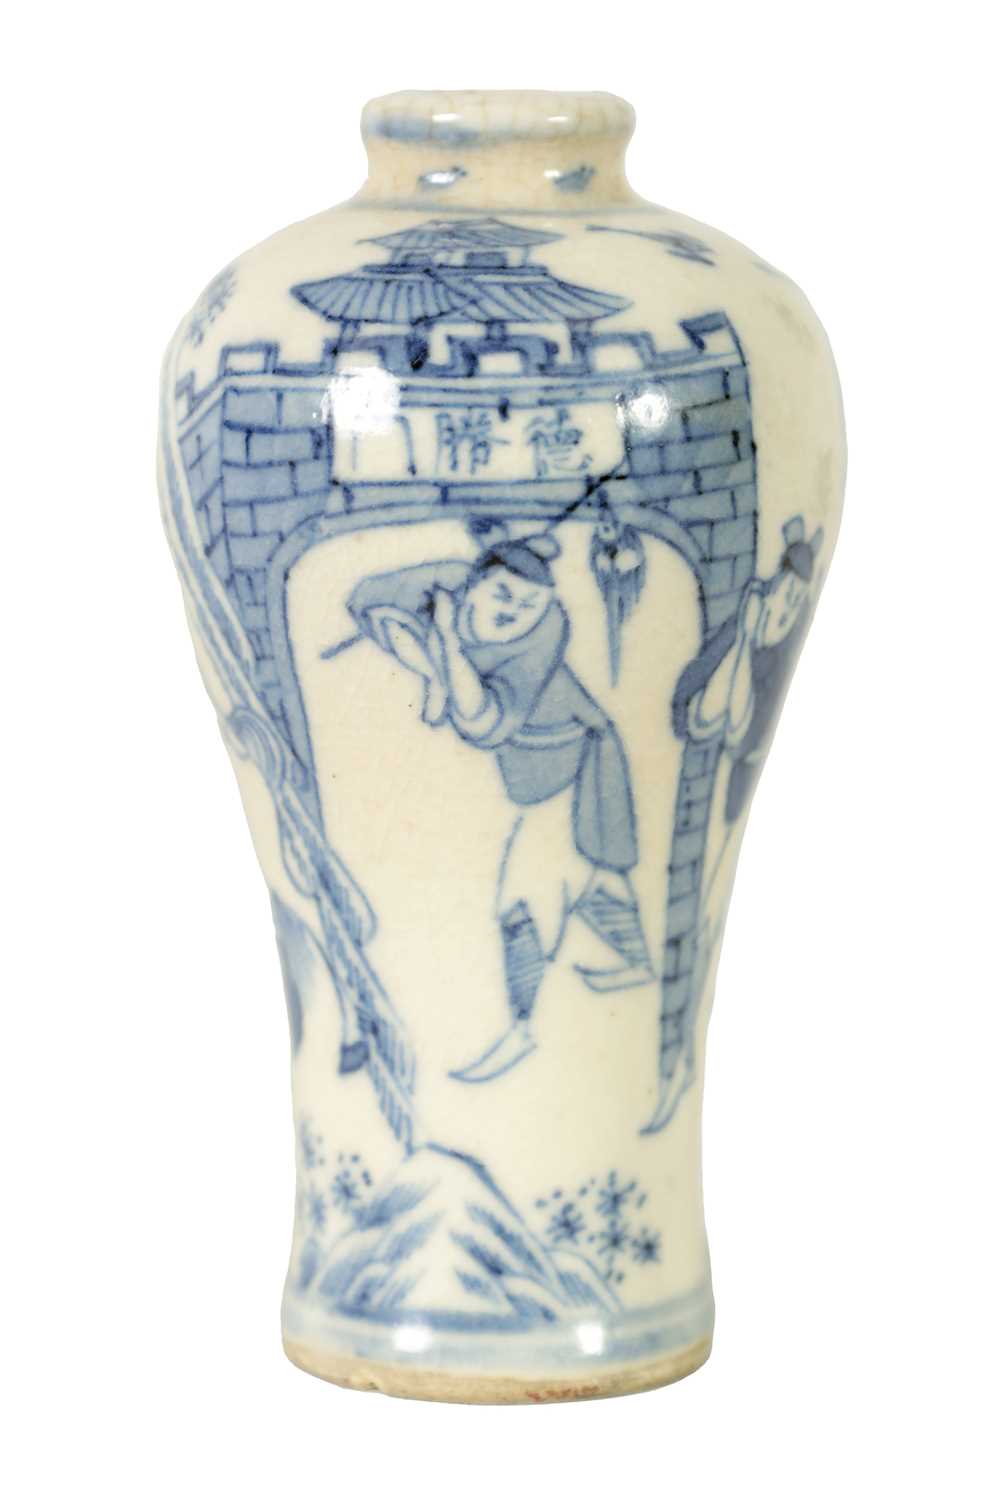 A 18TH CENTURY CHINESE MINIATURE BLUE AND WHITE INVERTED BALUSTER VASE